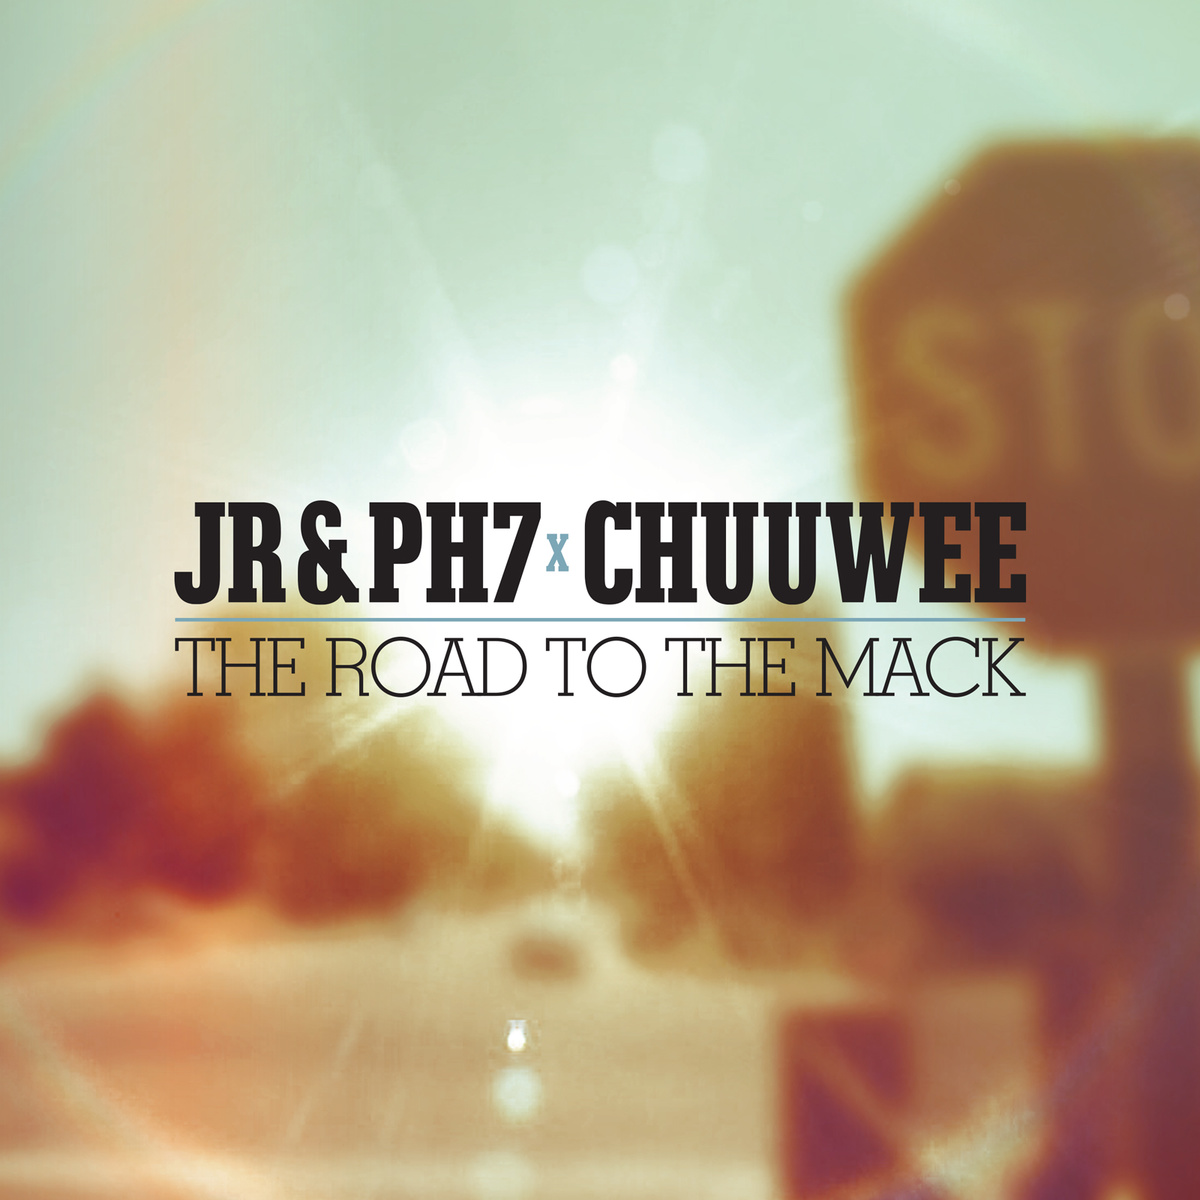 Jr___ph7_x_chuuwee_-_the_road_to_the_mack